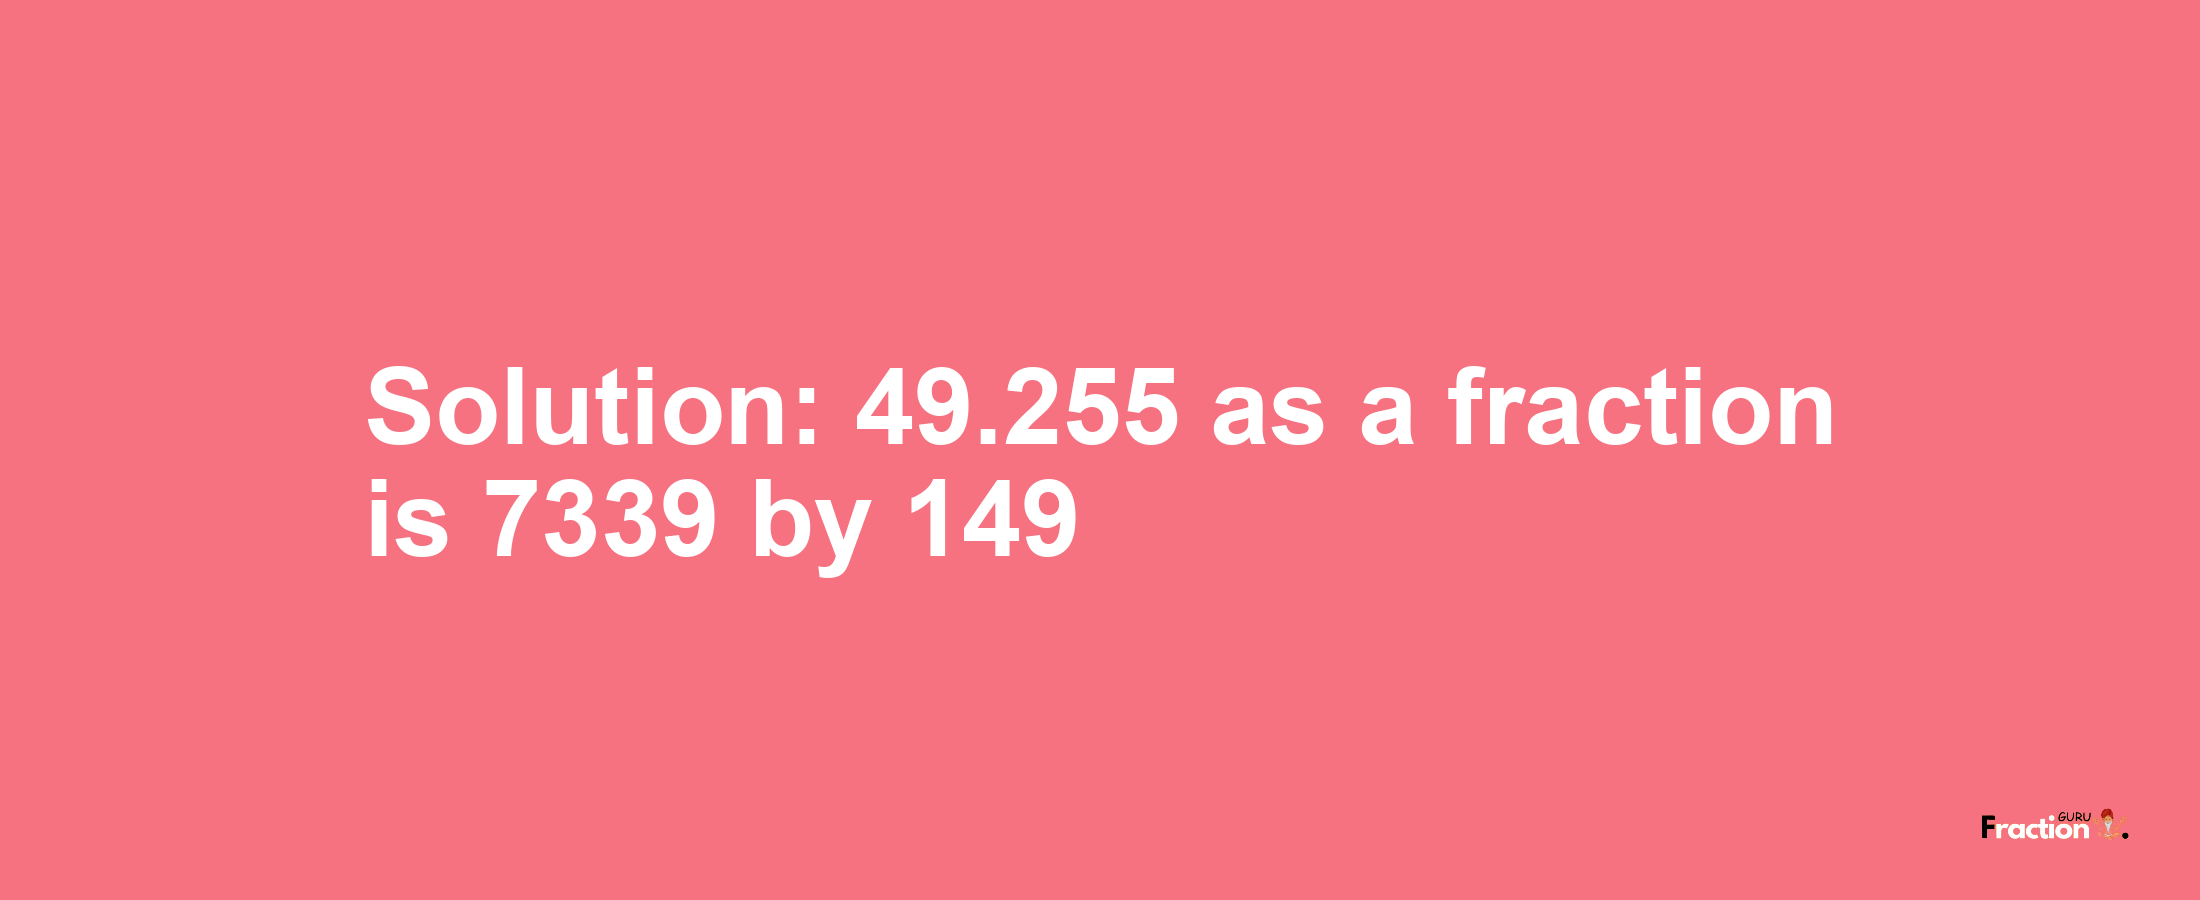 Solution:49.255 as a fraction is 7339/149